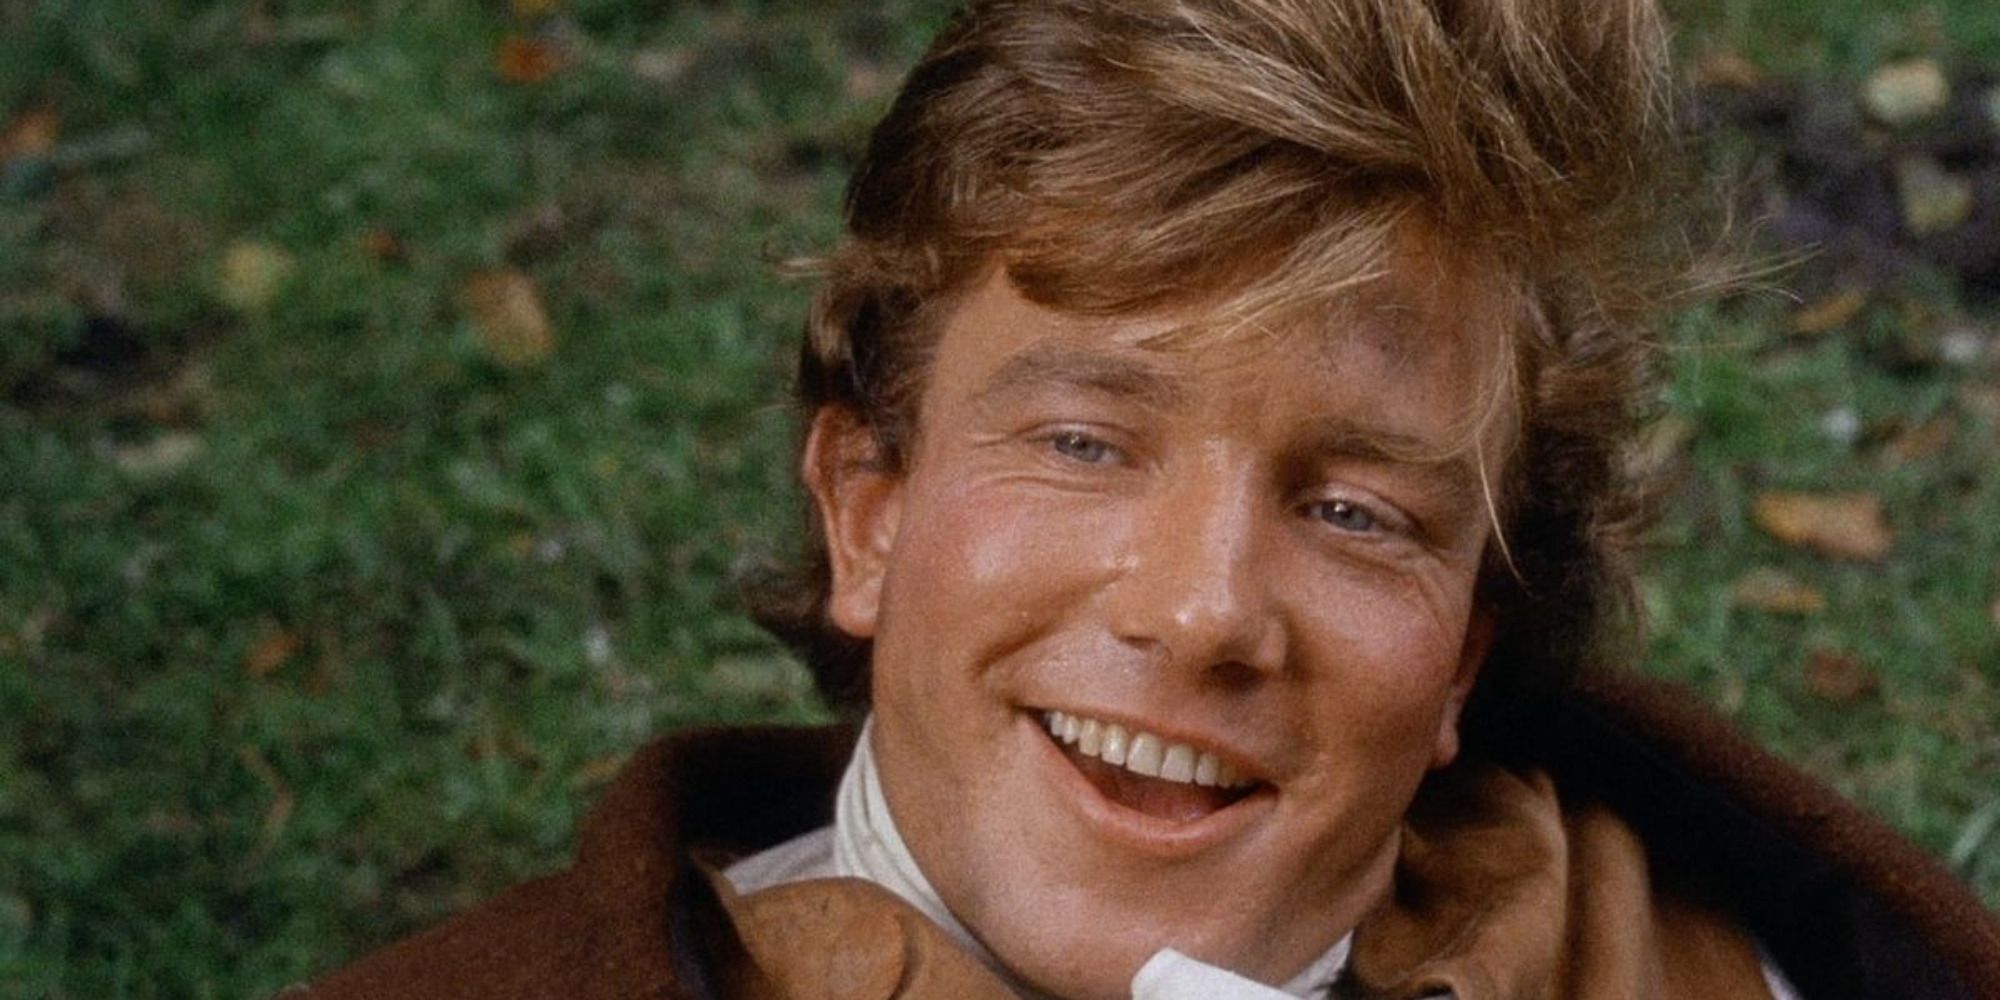 character Tom Jones in the movie of the same name, laughing while lying on the grass